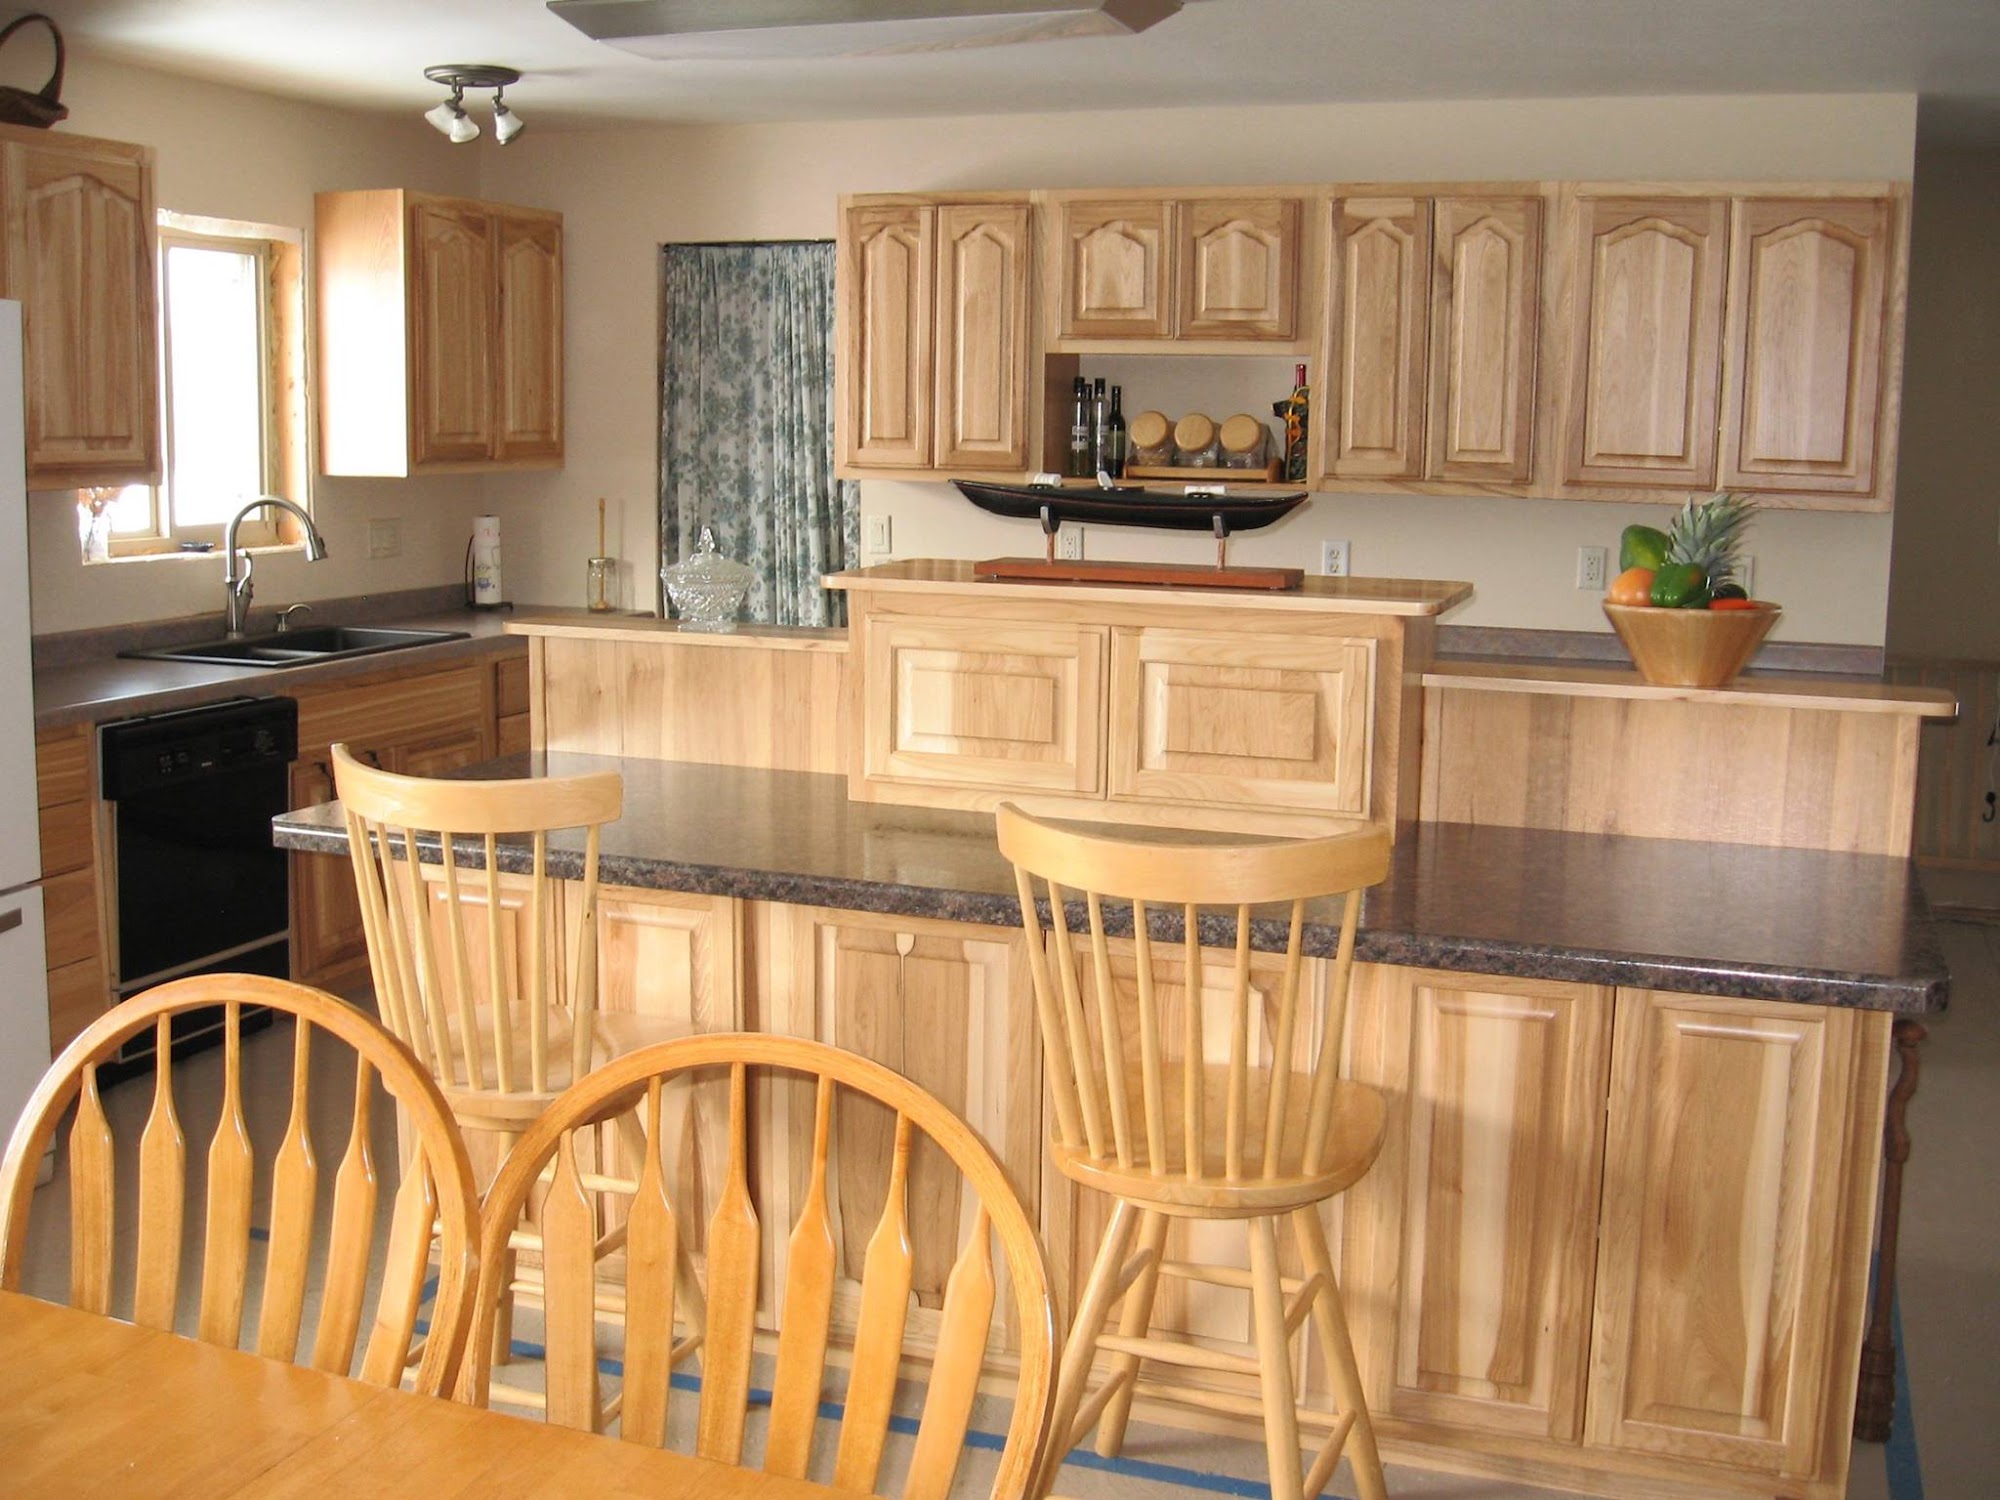 Better Built Custom Cabinetry 7154 State Hwy 13, Chelsea Wisconsin 54451